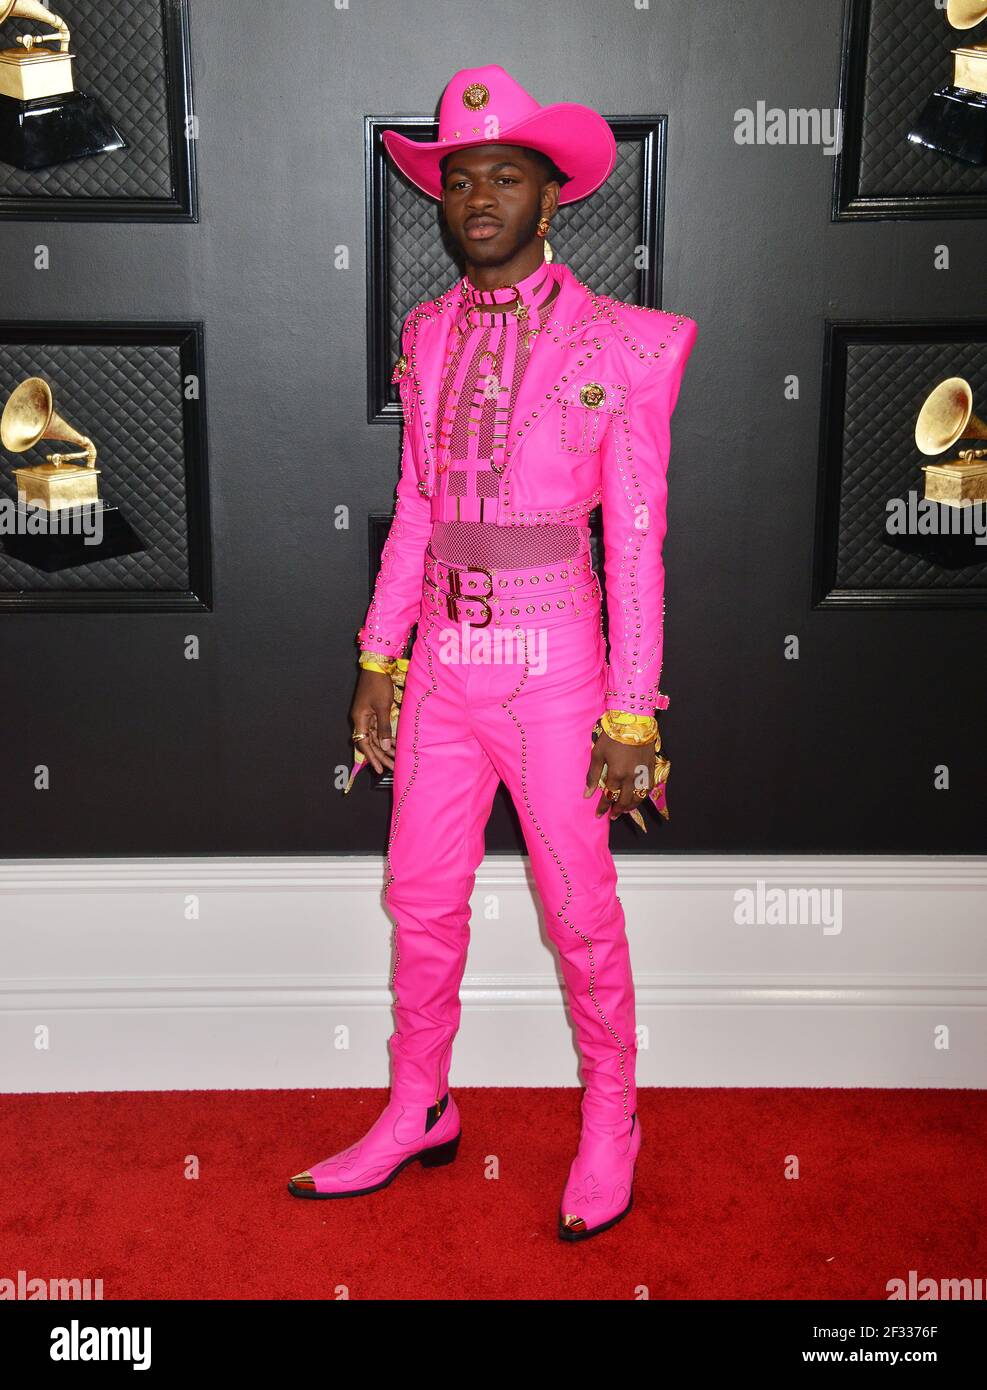 Lil Nas X  373 attends the 62nd Annual GRAMMY Awards at Staples Center on January 26, 2020 in Los Angeles, California Stock Photo